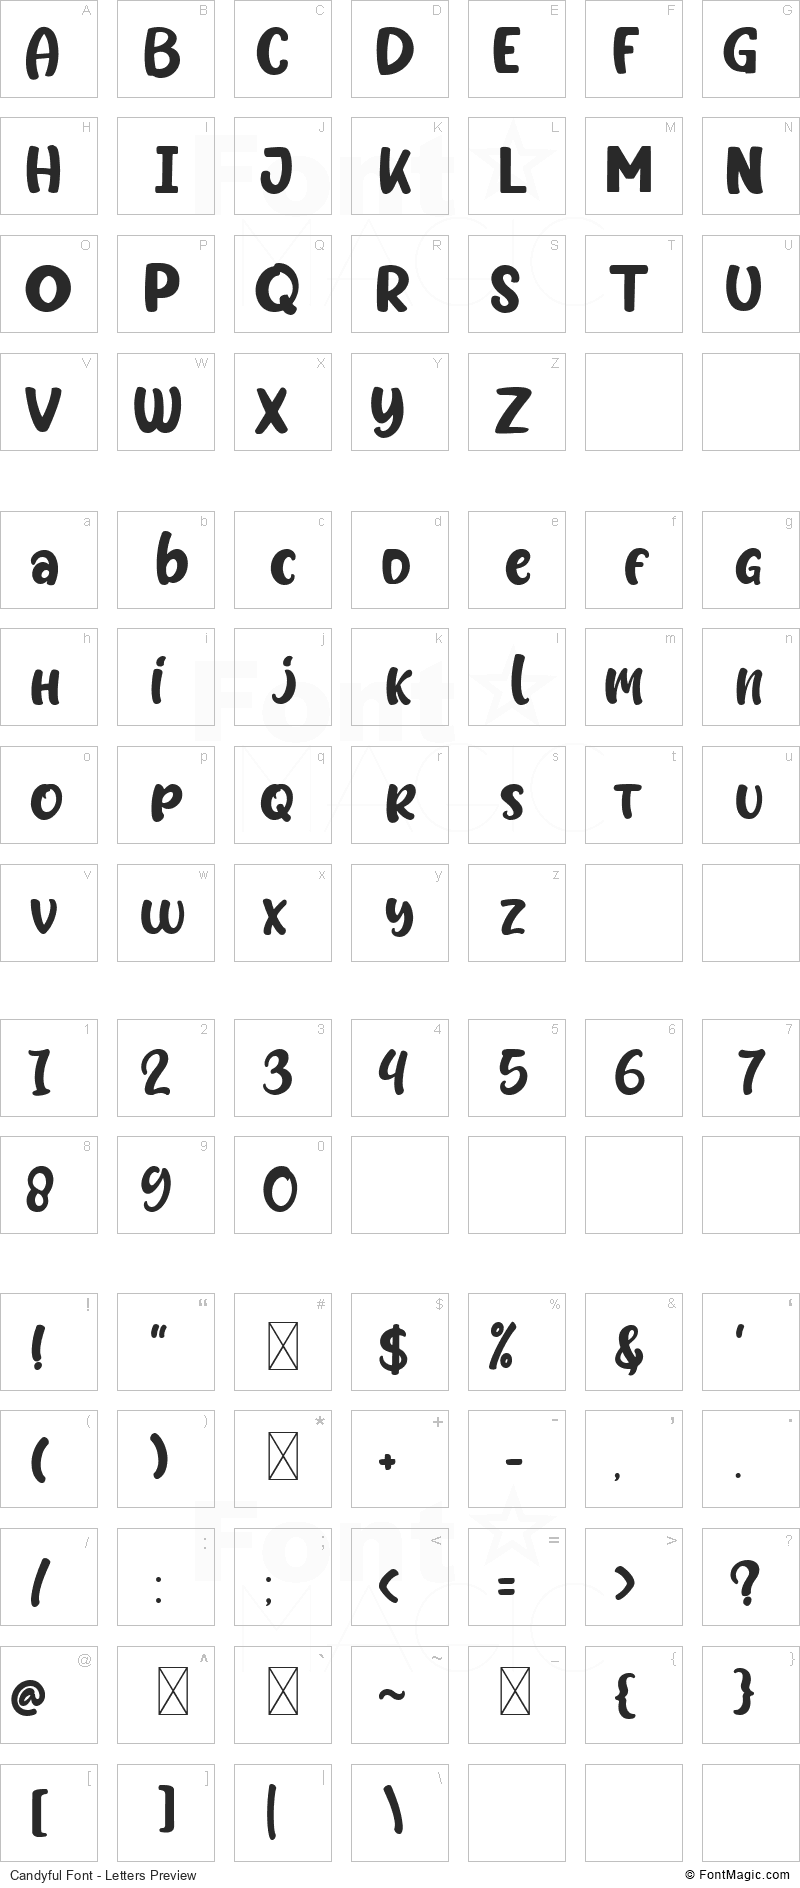 Candyful Font - All Latters Preview Chart